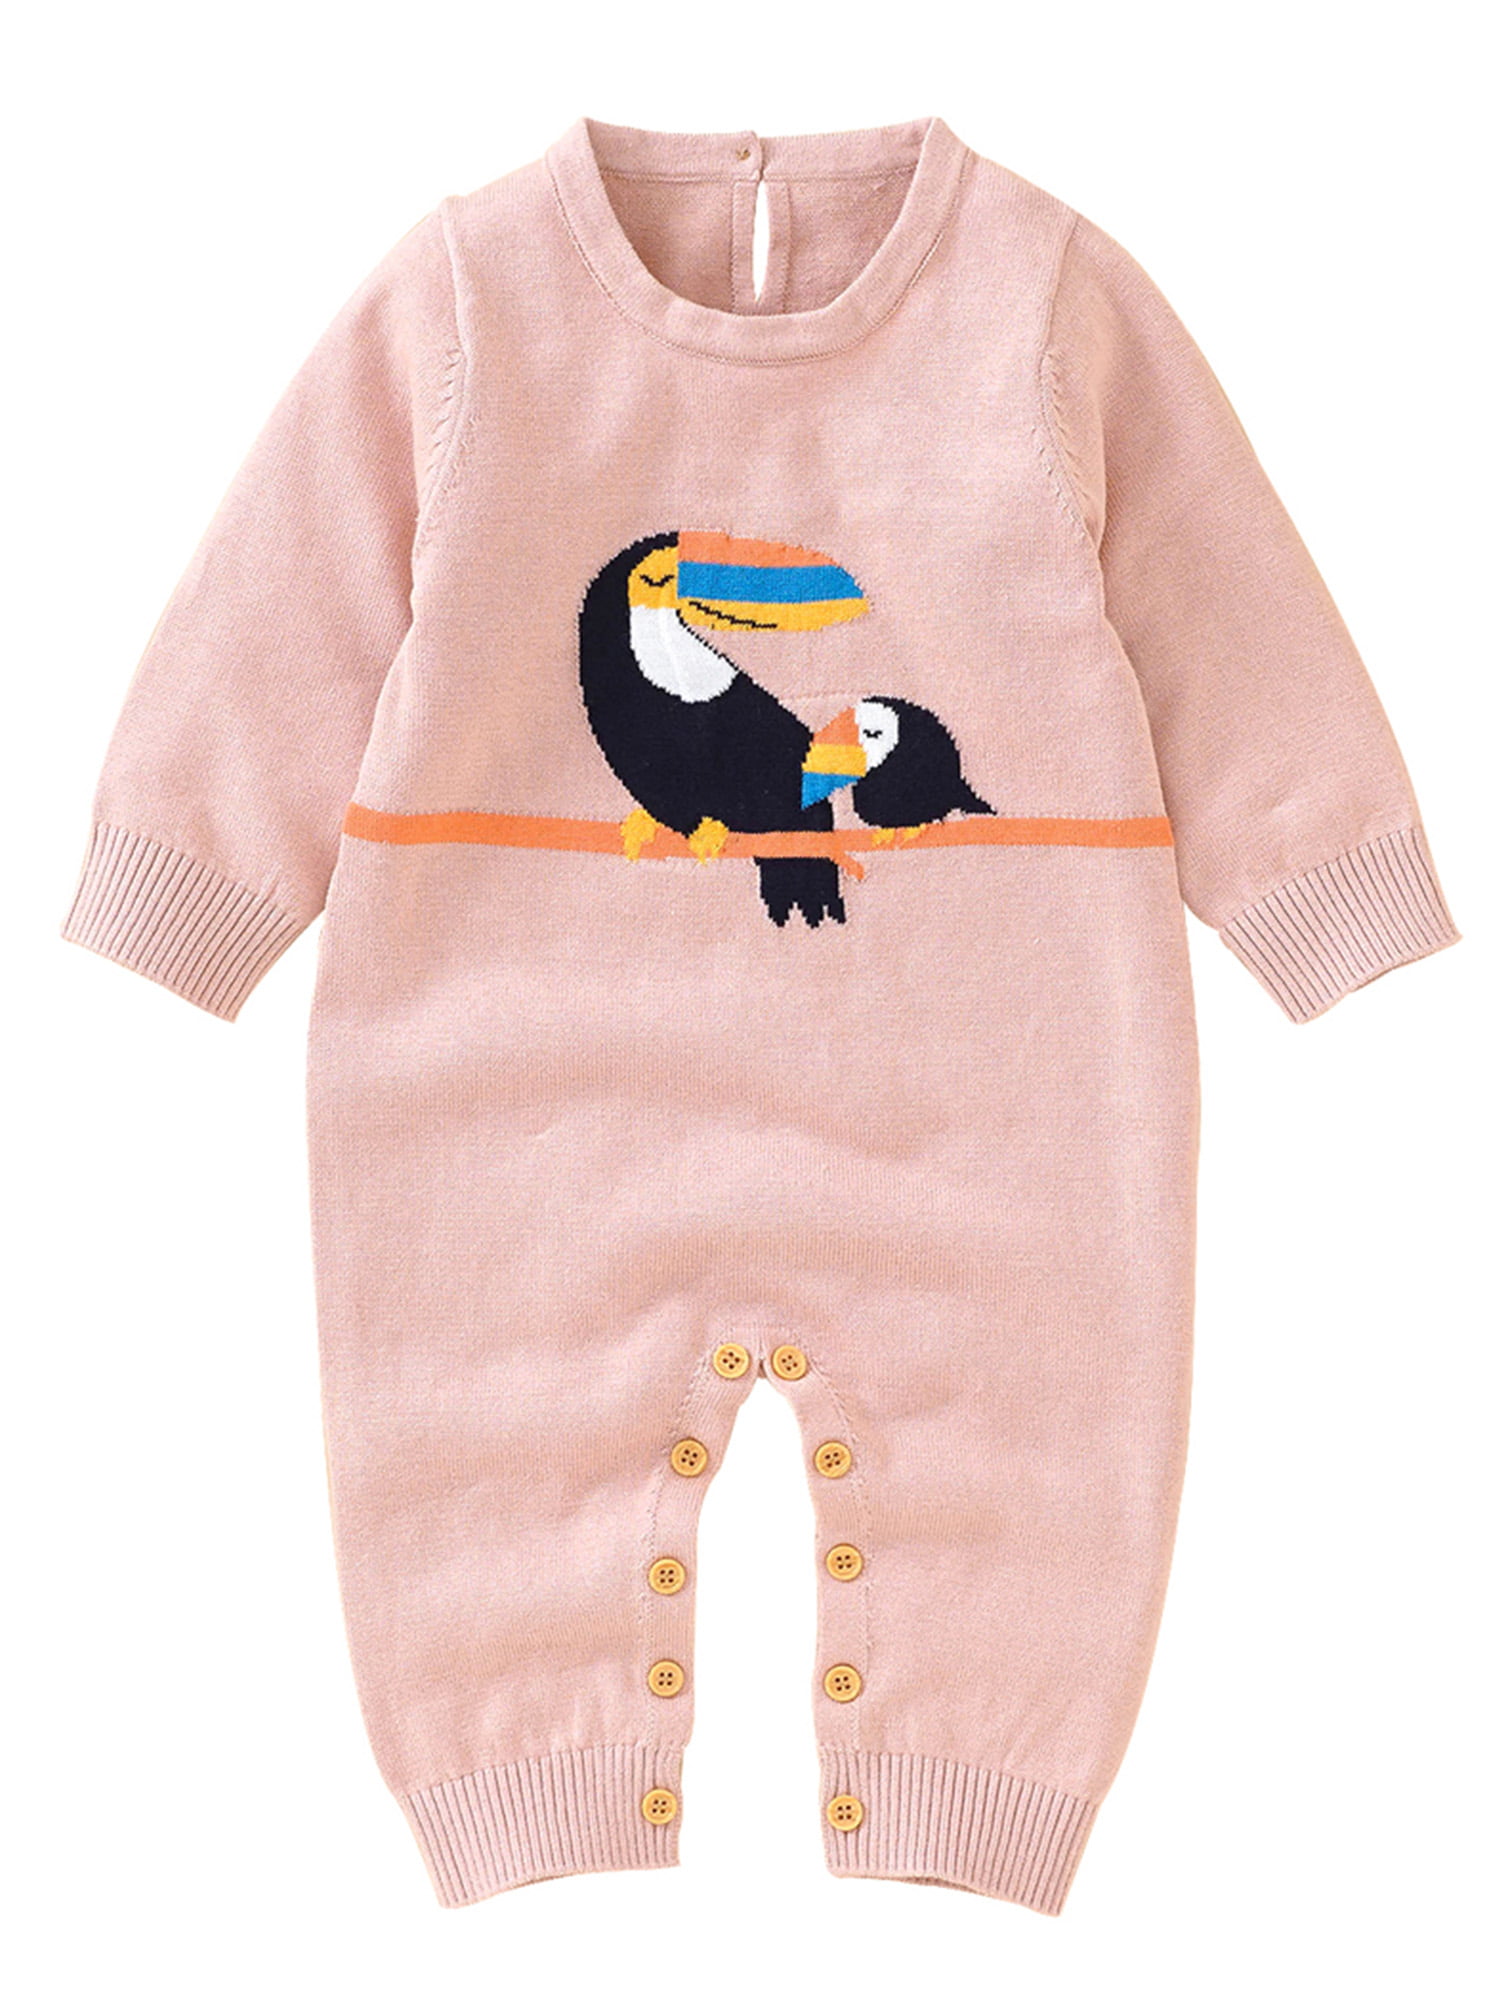 Ritmisch Conventie Natura Avamo Infant Knitted One Piece Jumpsuit Long Sleeve Loose Playsuit Bird  Printed Party Bodysuit Pink 74 - Walmart.com